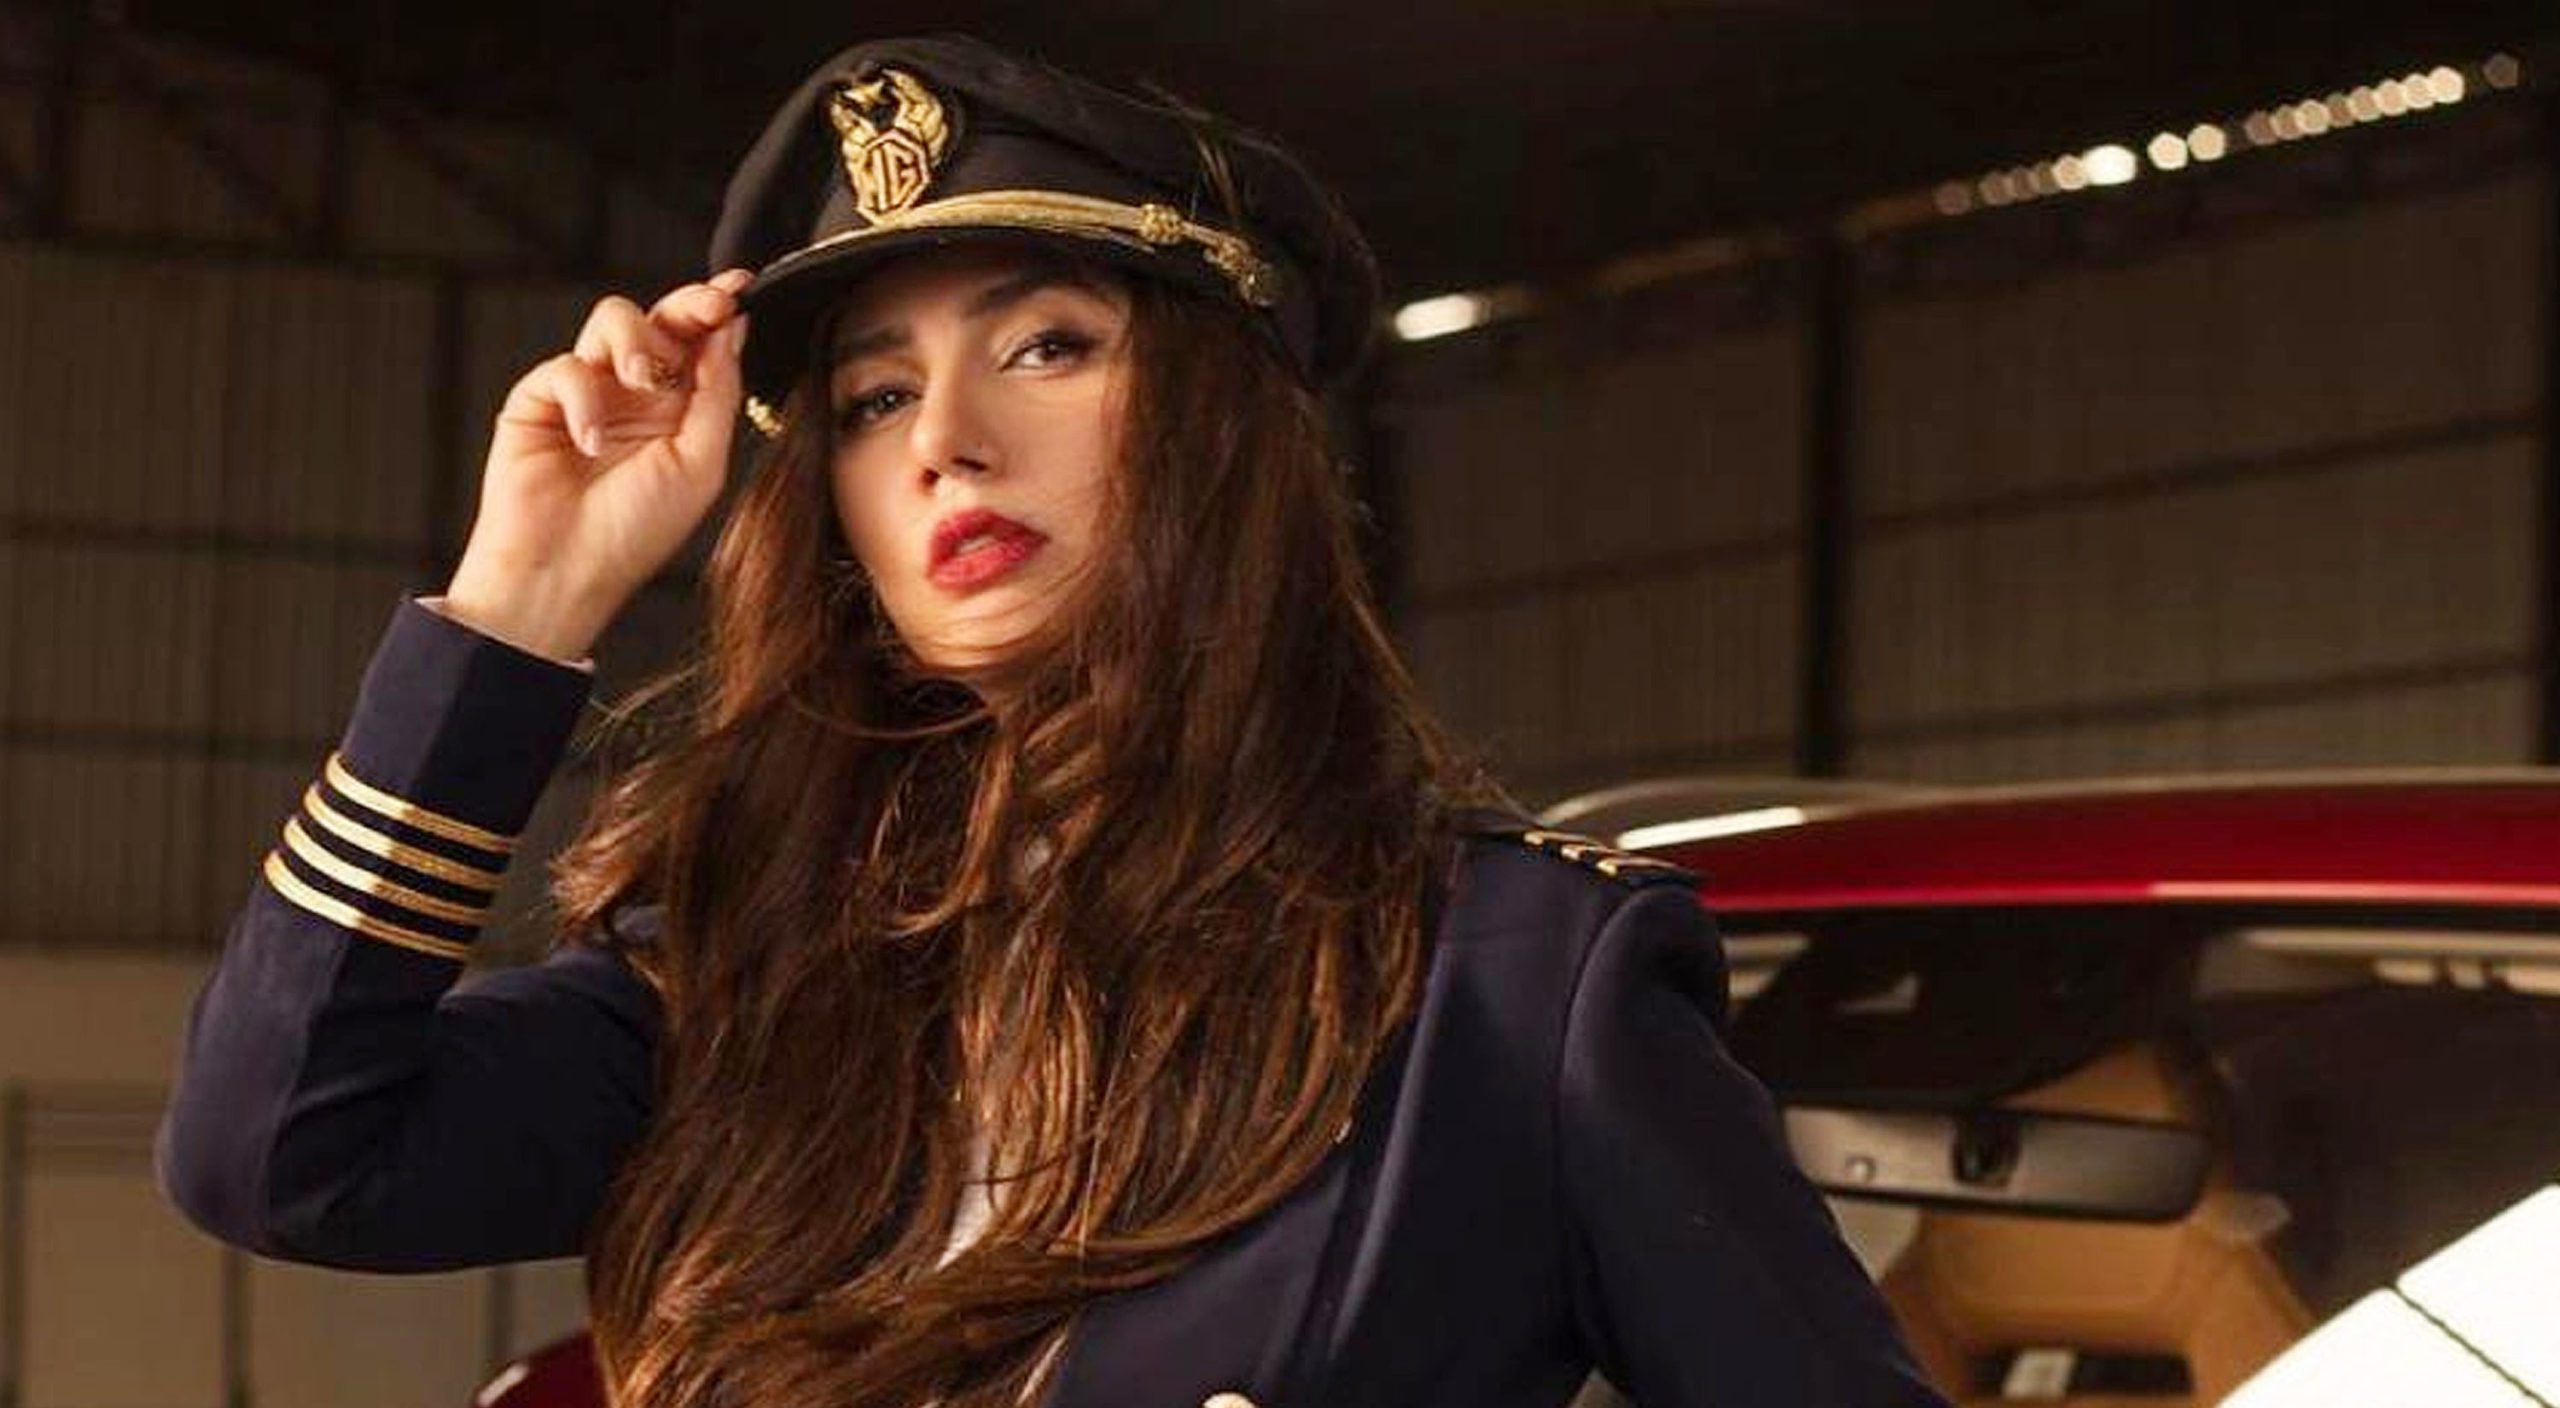 Mahira Khan looks nothing short of a vision dressed as pilot with a sassy look (Instagram)